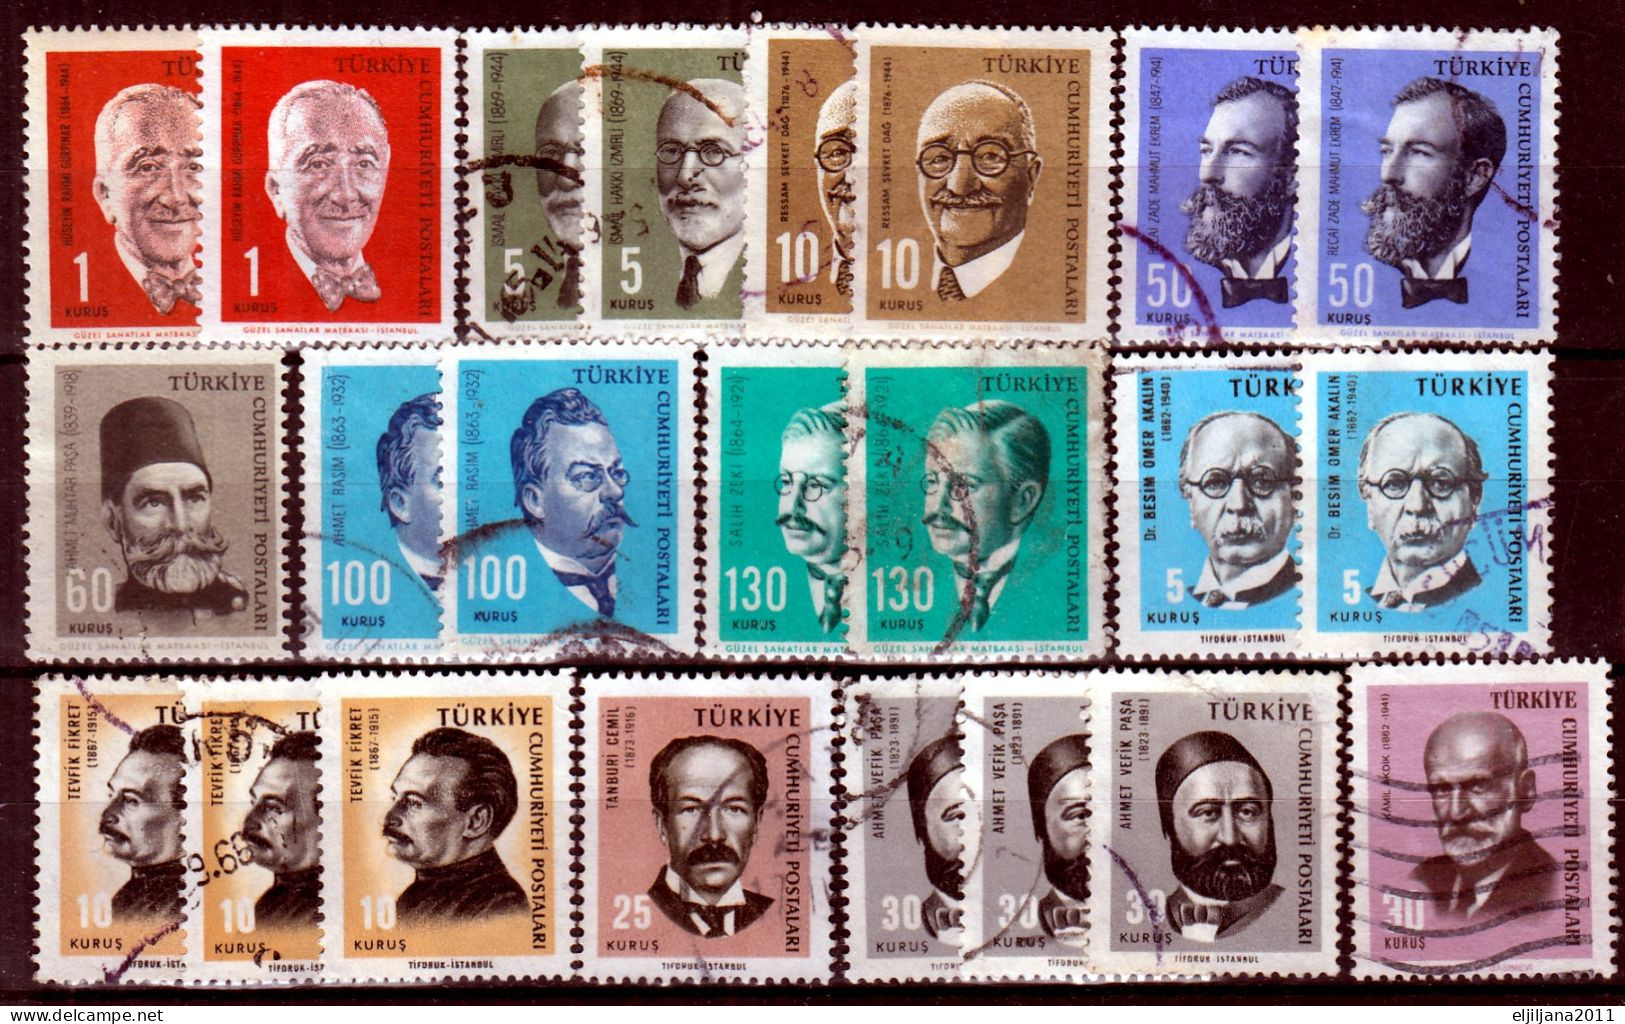 SALE !! 50 % OFF !! ⁕ Turkey 1964 - 1967 ⁕ Famous People ⁕ 39v Used - Used Stamps